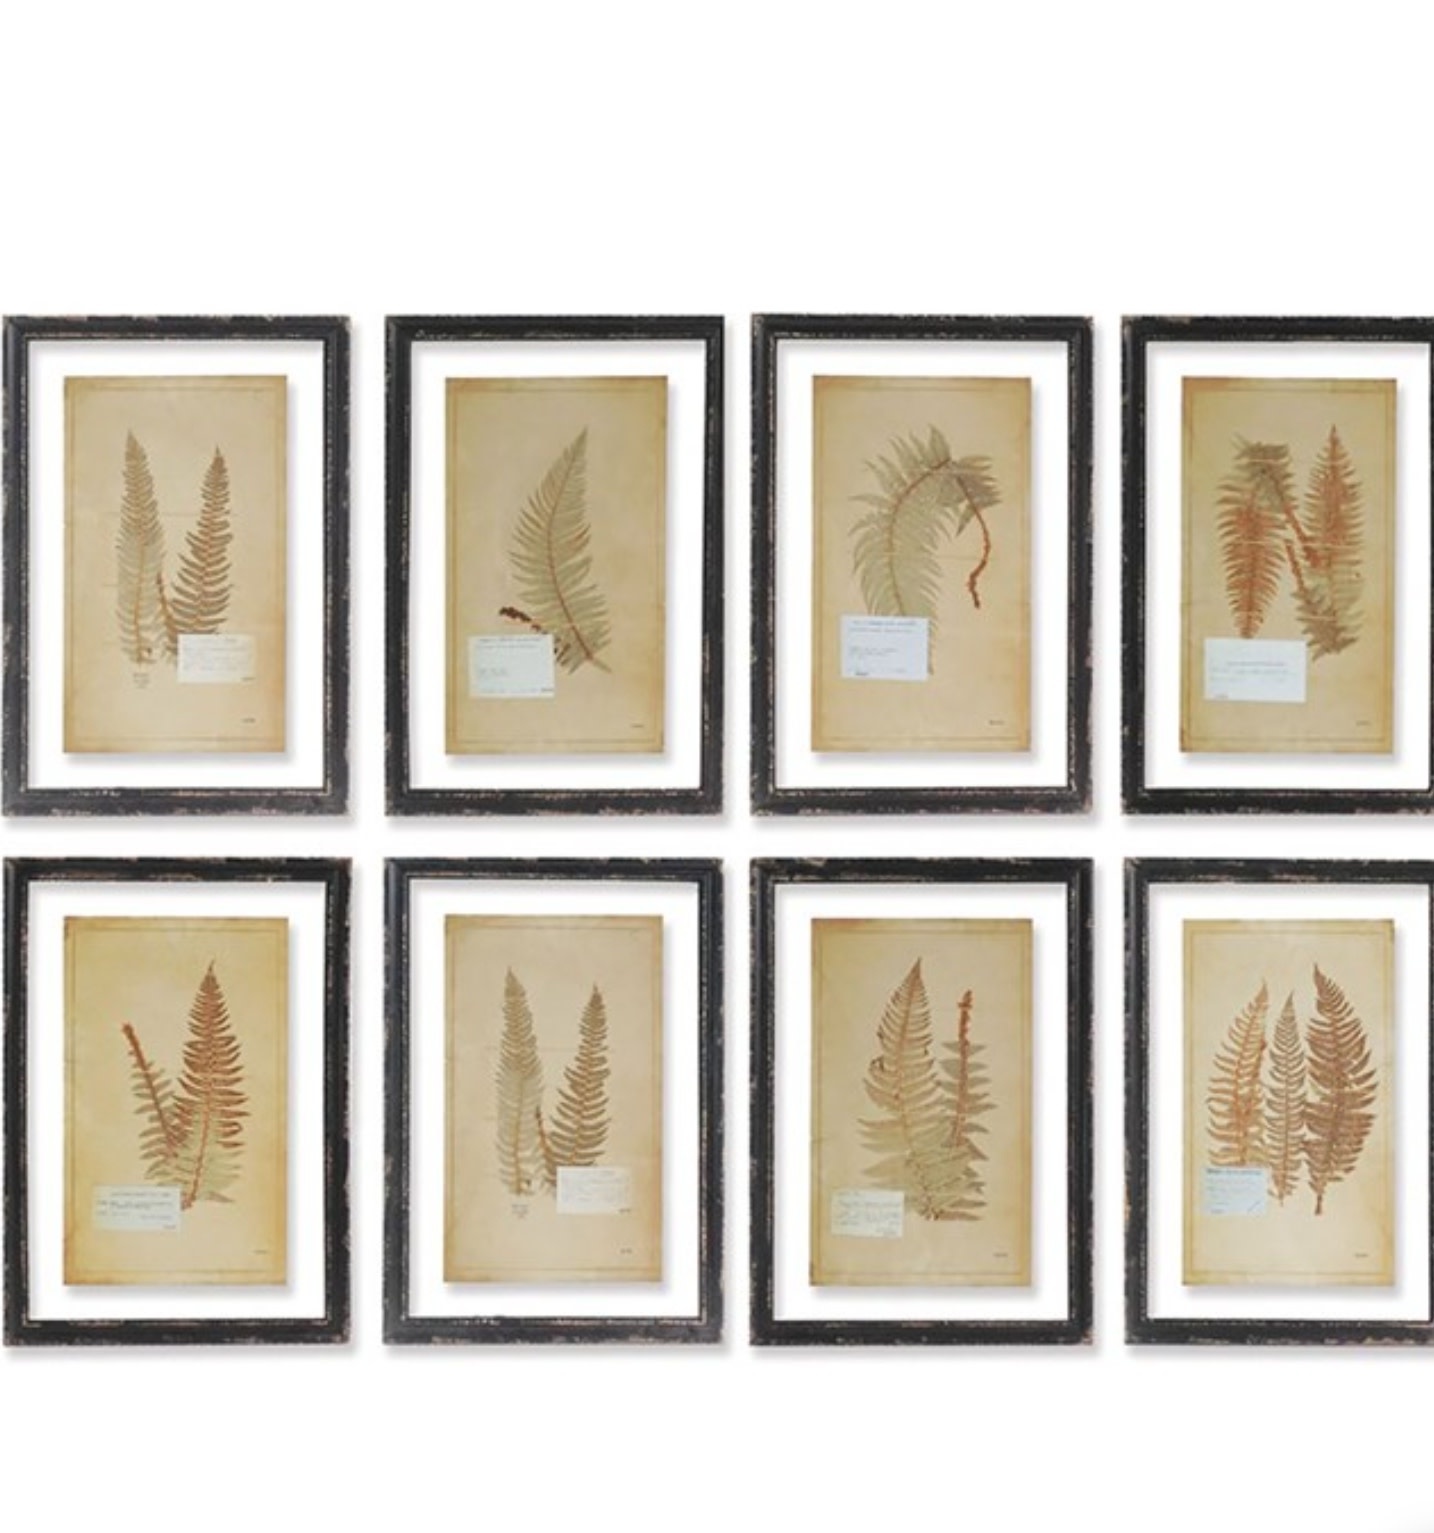 Framed Vintage Fern Prints 16"x23", Available for local pick up, priced individually